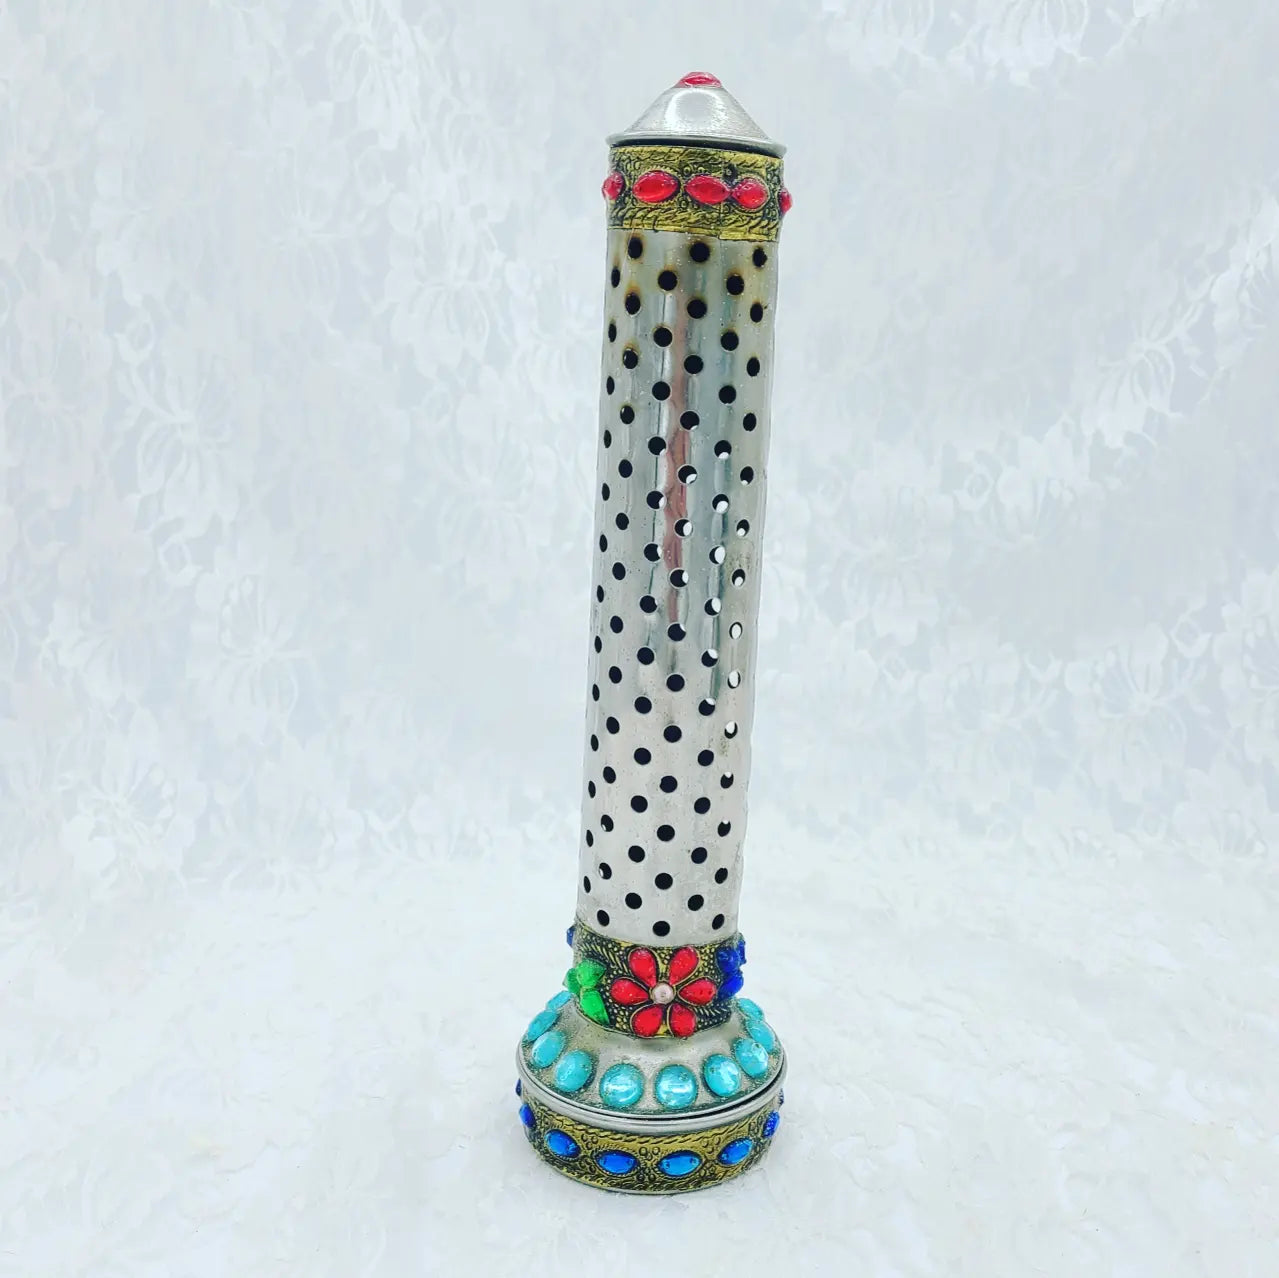 Bejeweled Vintage India Incense Burner Tower ~ Upright Tower ~ Burns Incense, Contains The Ash and Dust from Burning Incense